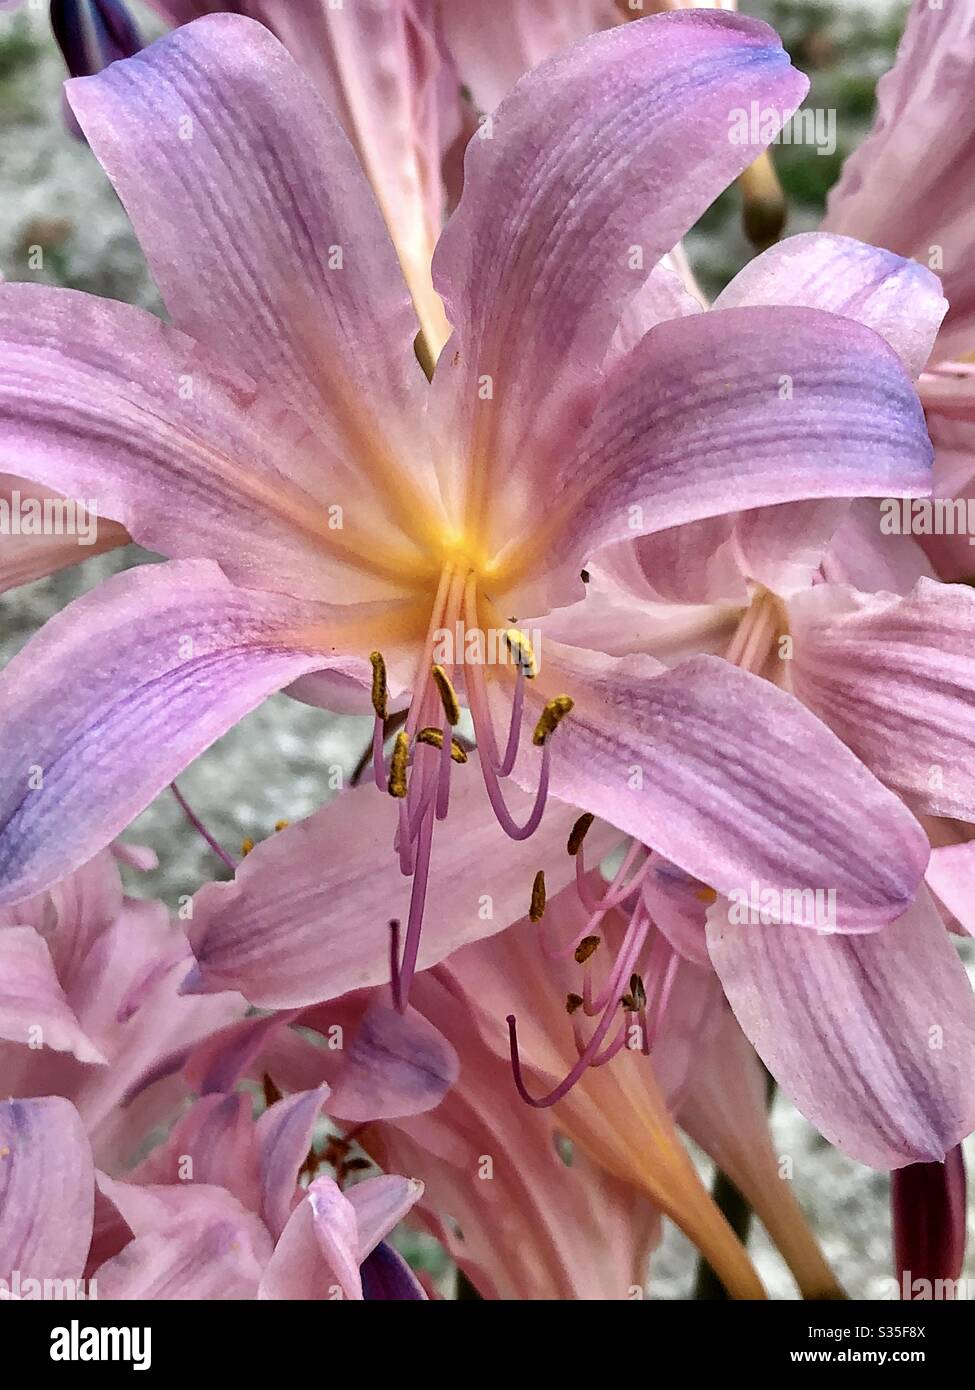 Closeup, downward angle, Surprise Lily, blossoms, pink colors, textures, natural, nature, nature’s beauty,flowers, lilies Stock Photo